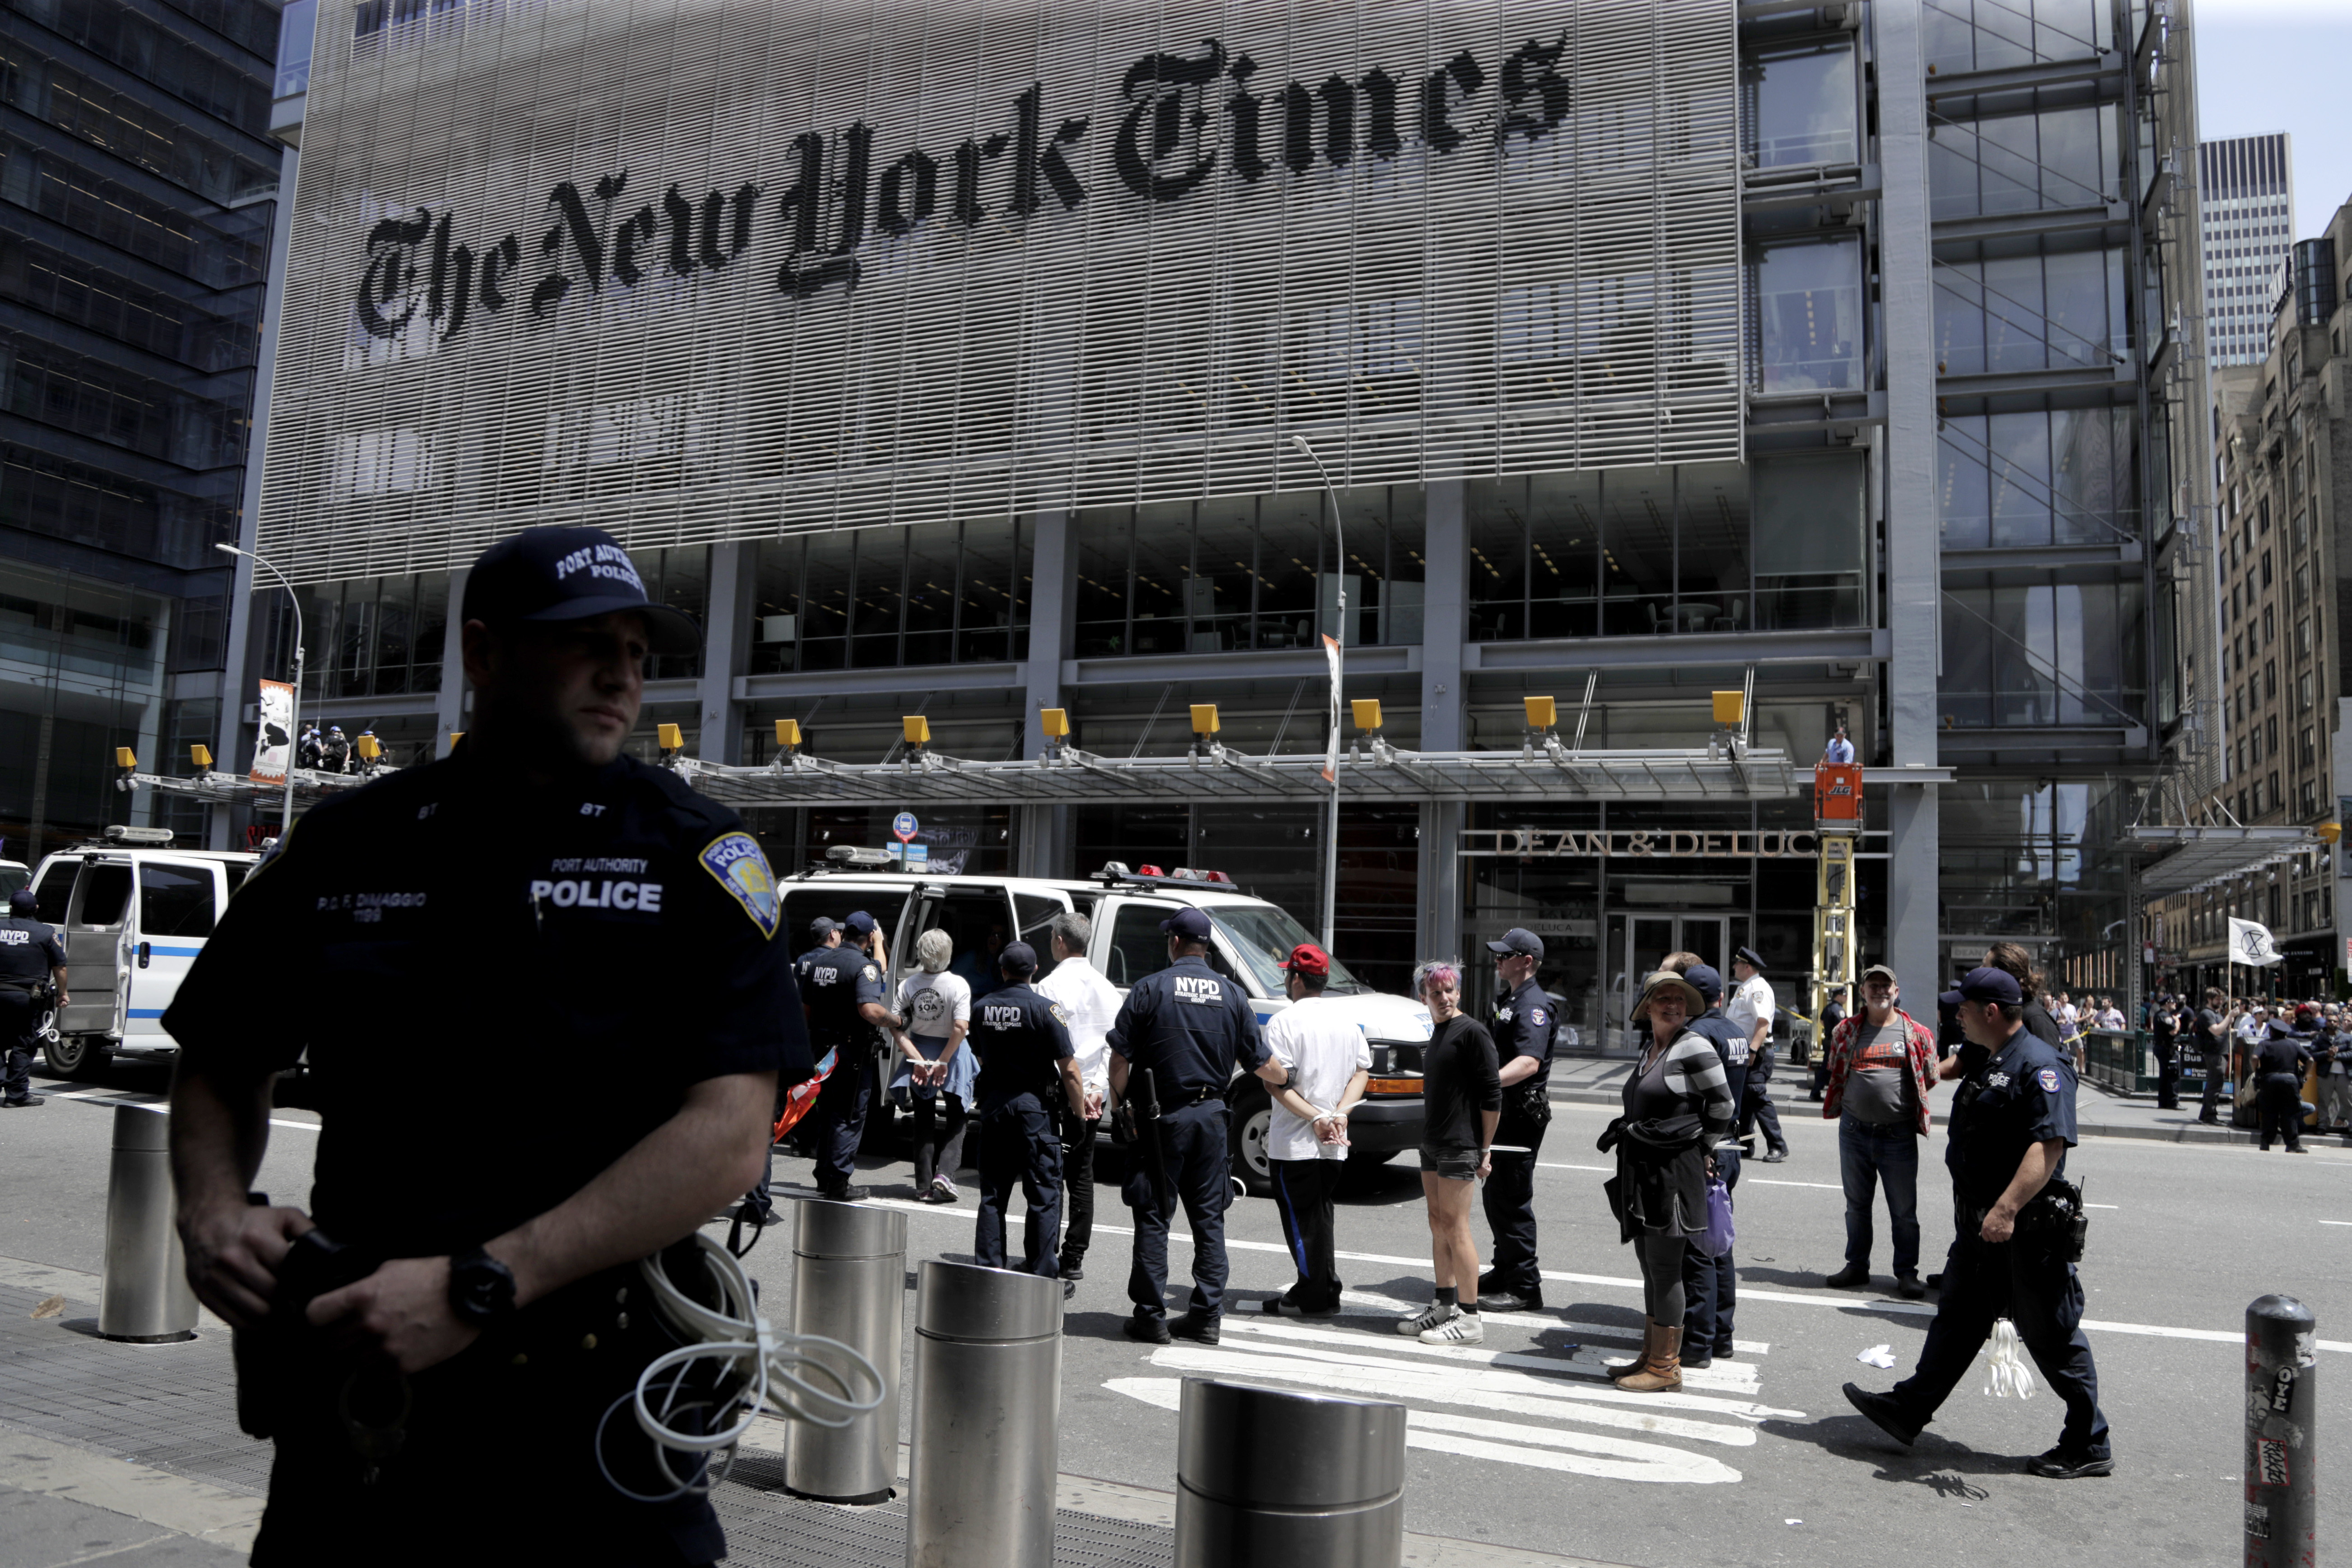 New York Police officers take into custody activists during a climate change rally outside of the New York Times building, Saturday, June 22, 2019, in New York. Activists blocked traffic along 8th Avenue during a sit-in to demand coverage of climate change by the newspaper. (AP Photo/Julio Cortez)